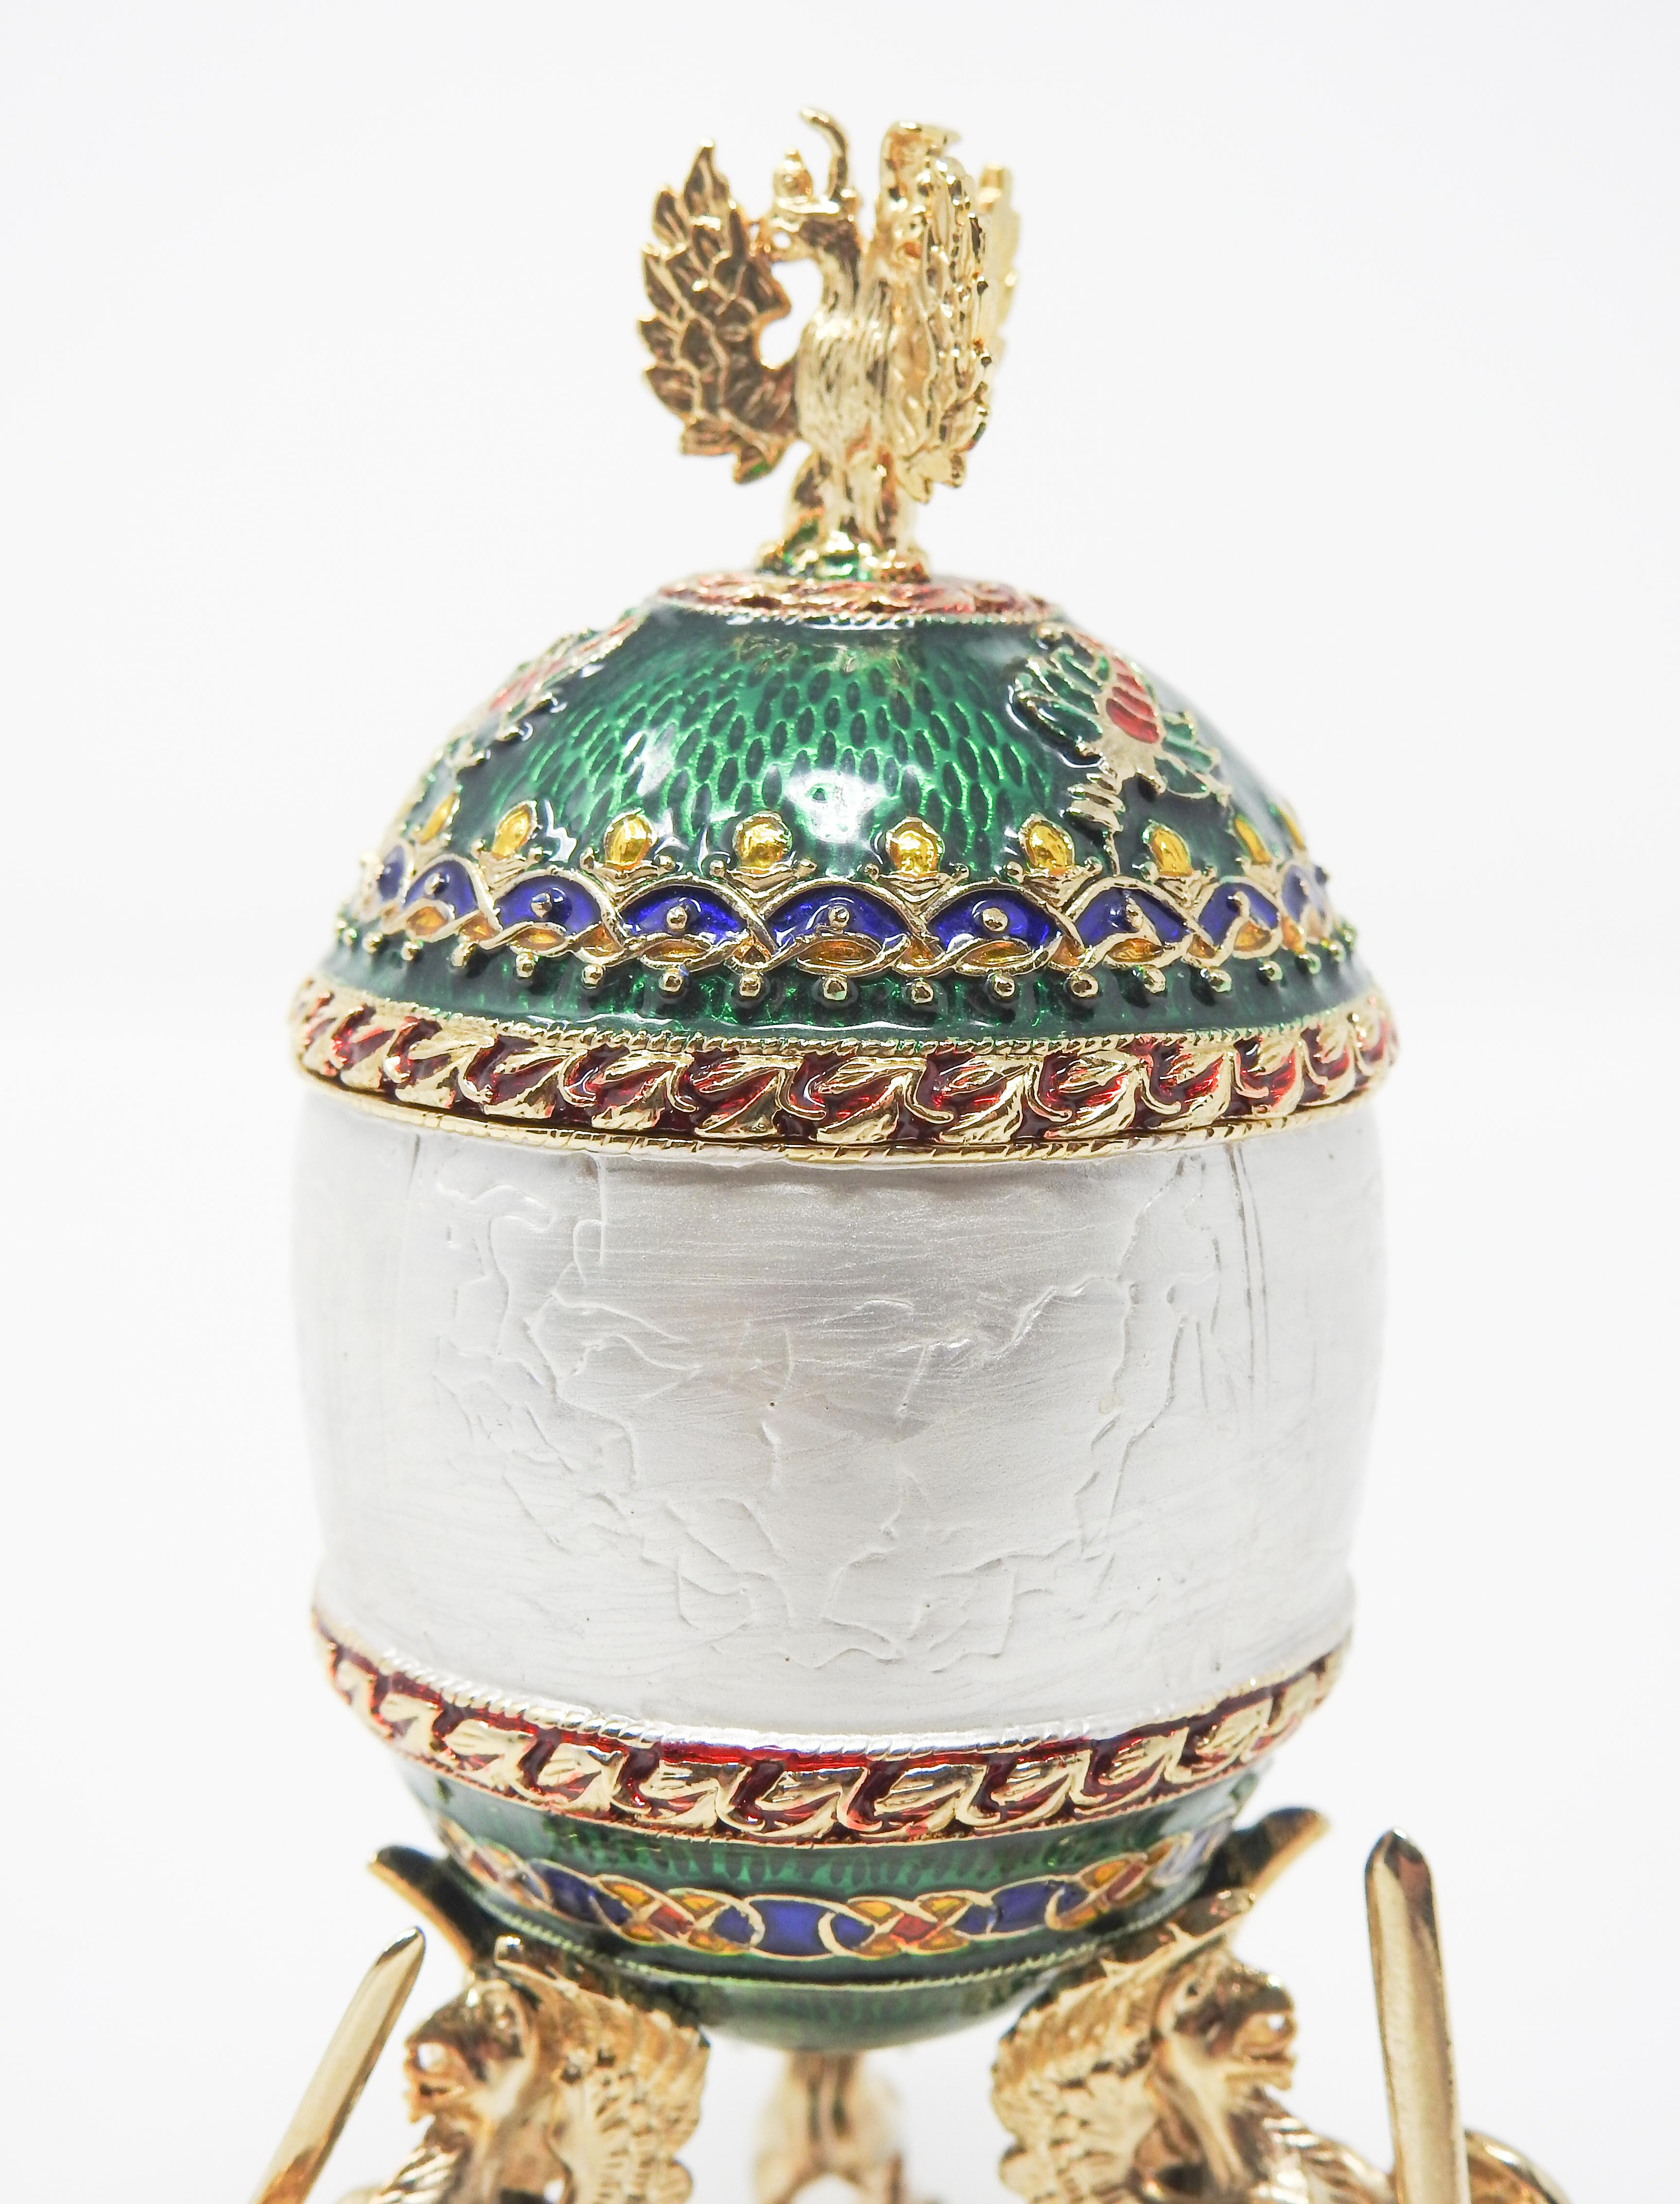 Offering this stunning Faberge style egg. Starting on a pearl enamel base with three winged figures. The egg sits atop the winged figures and is done in vibrant tones of green, silver, red, blue, yellow, and burgundy. There is Greek stamped on the